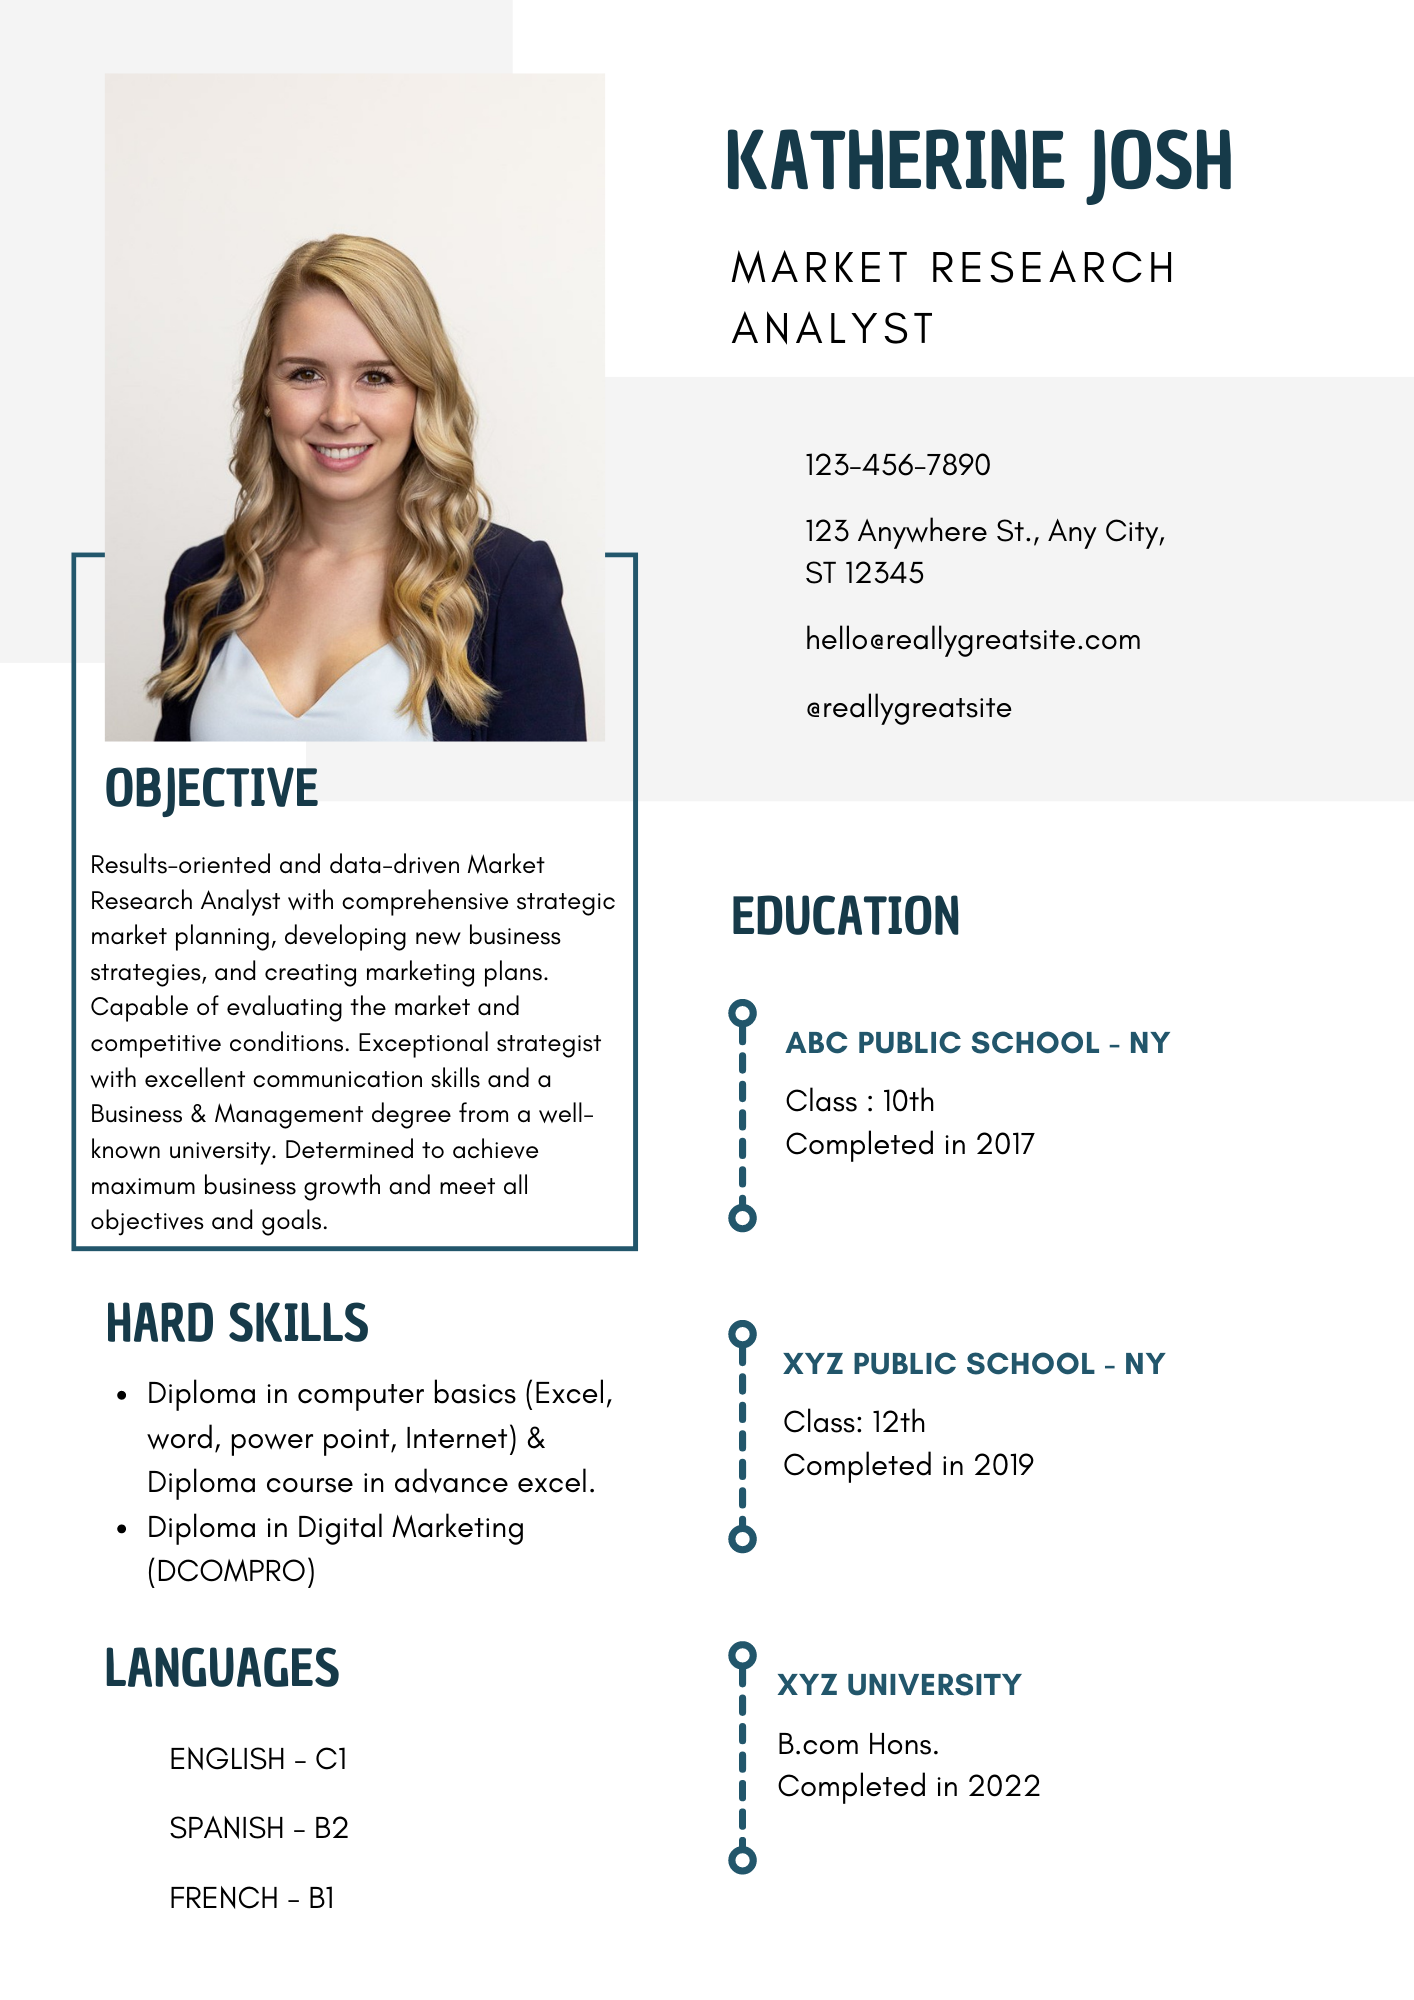 Template For Market Research Analyst Job